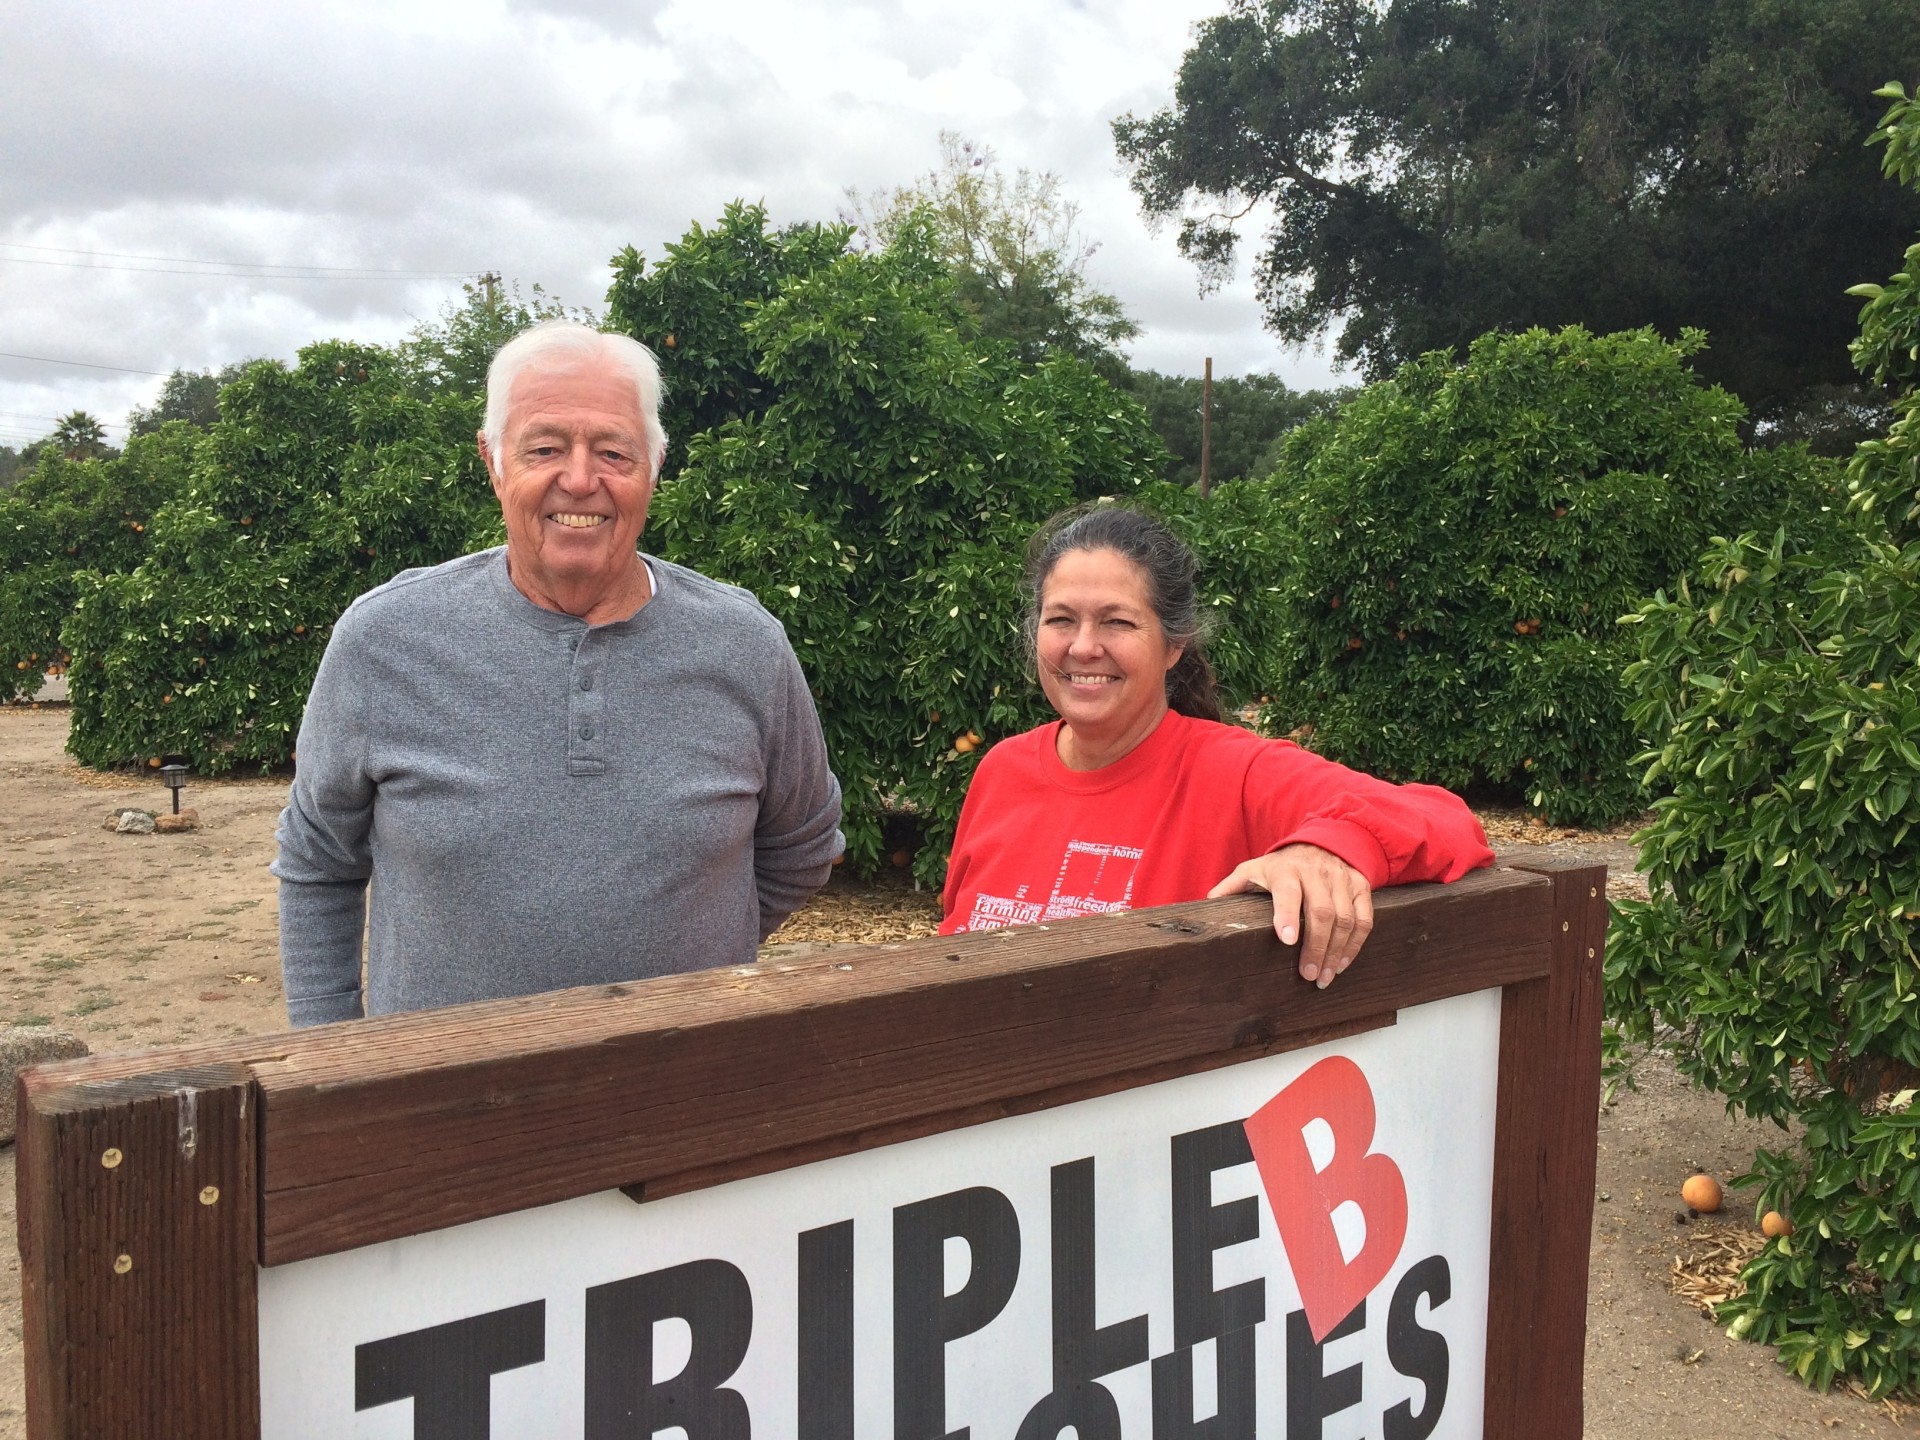 Gary Broomell and his daughter, Debbie, pose behind a sign on their ranch in San Diego County. Their family has been growing citrus for generations, but lately, it's been hard staying in the black growing oranges, so they started a vineyard a few years ago.